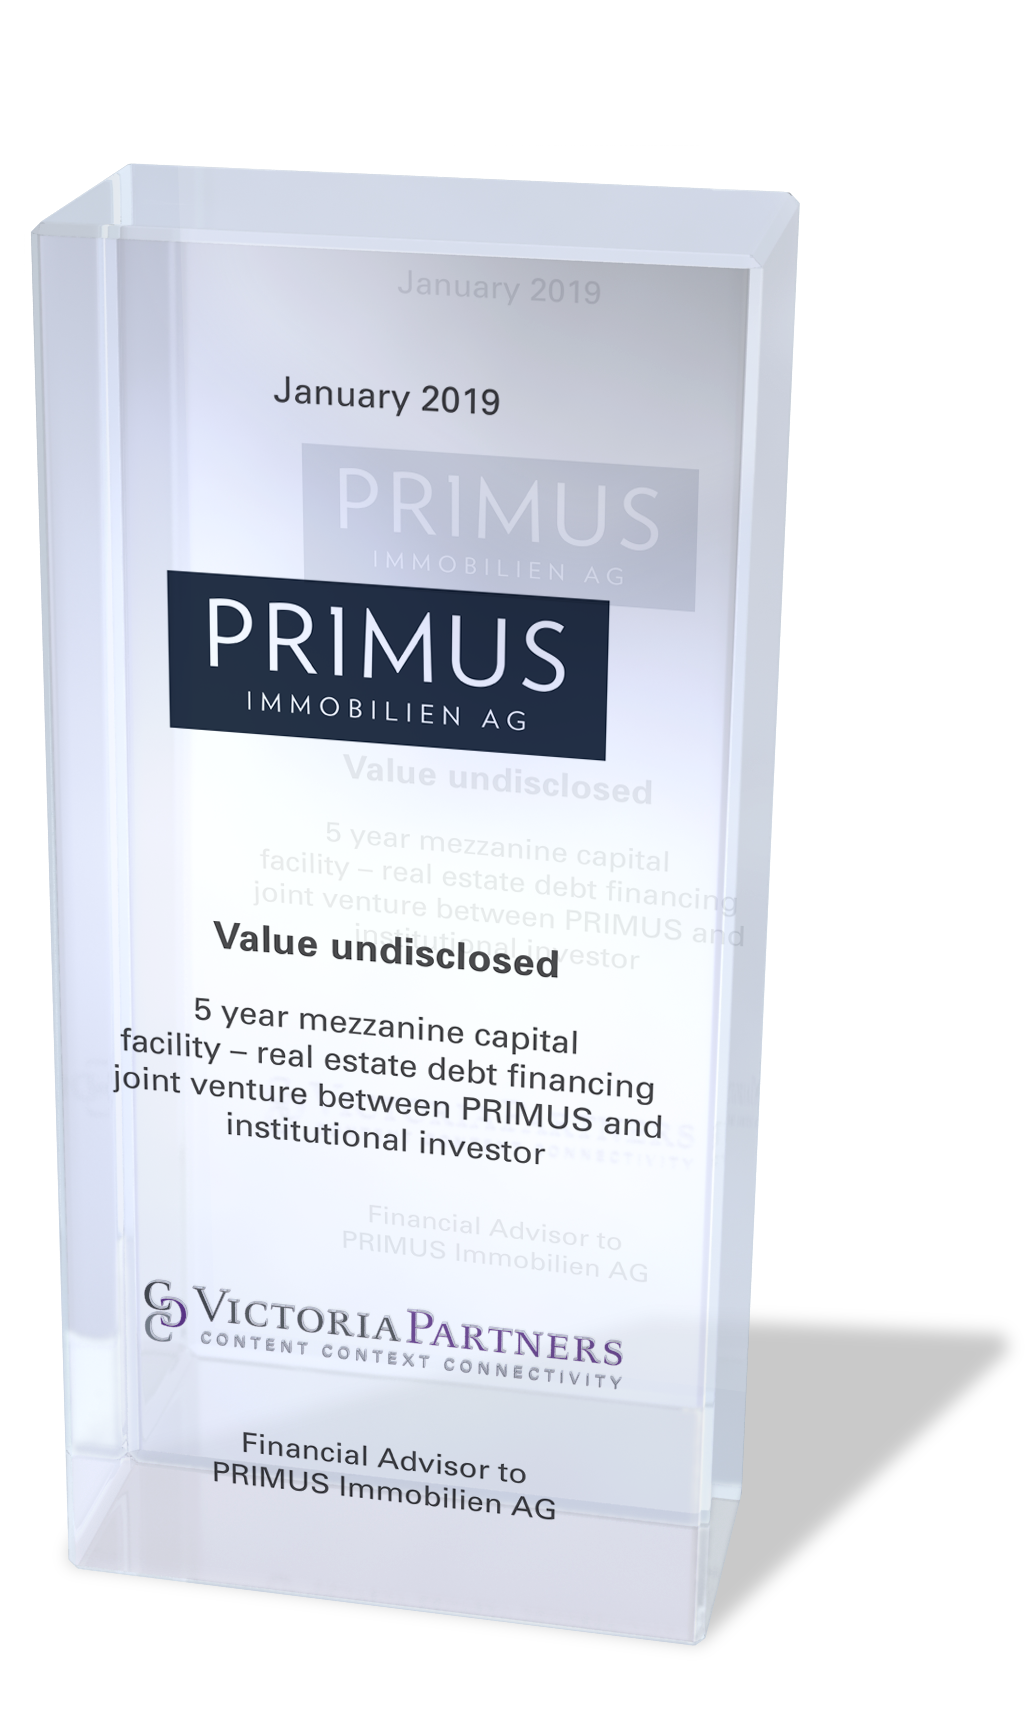 VICTORIAPARTNERS - Financial Advisor to PRIMUS Immobilien AG - January 2019